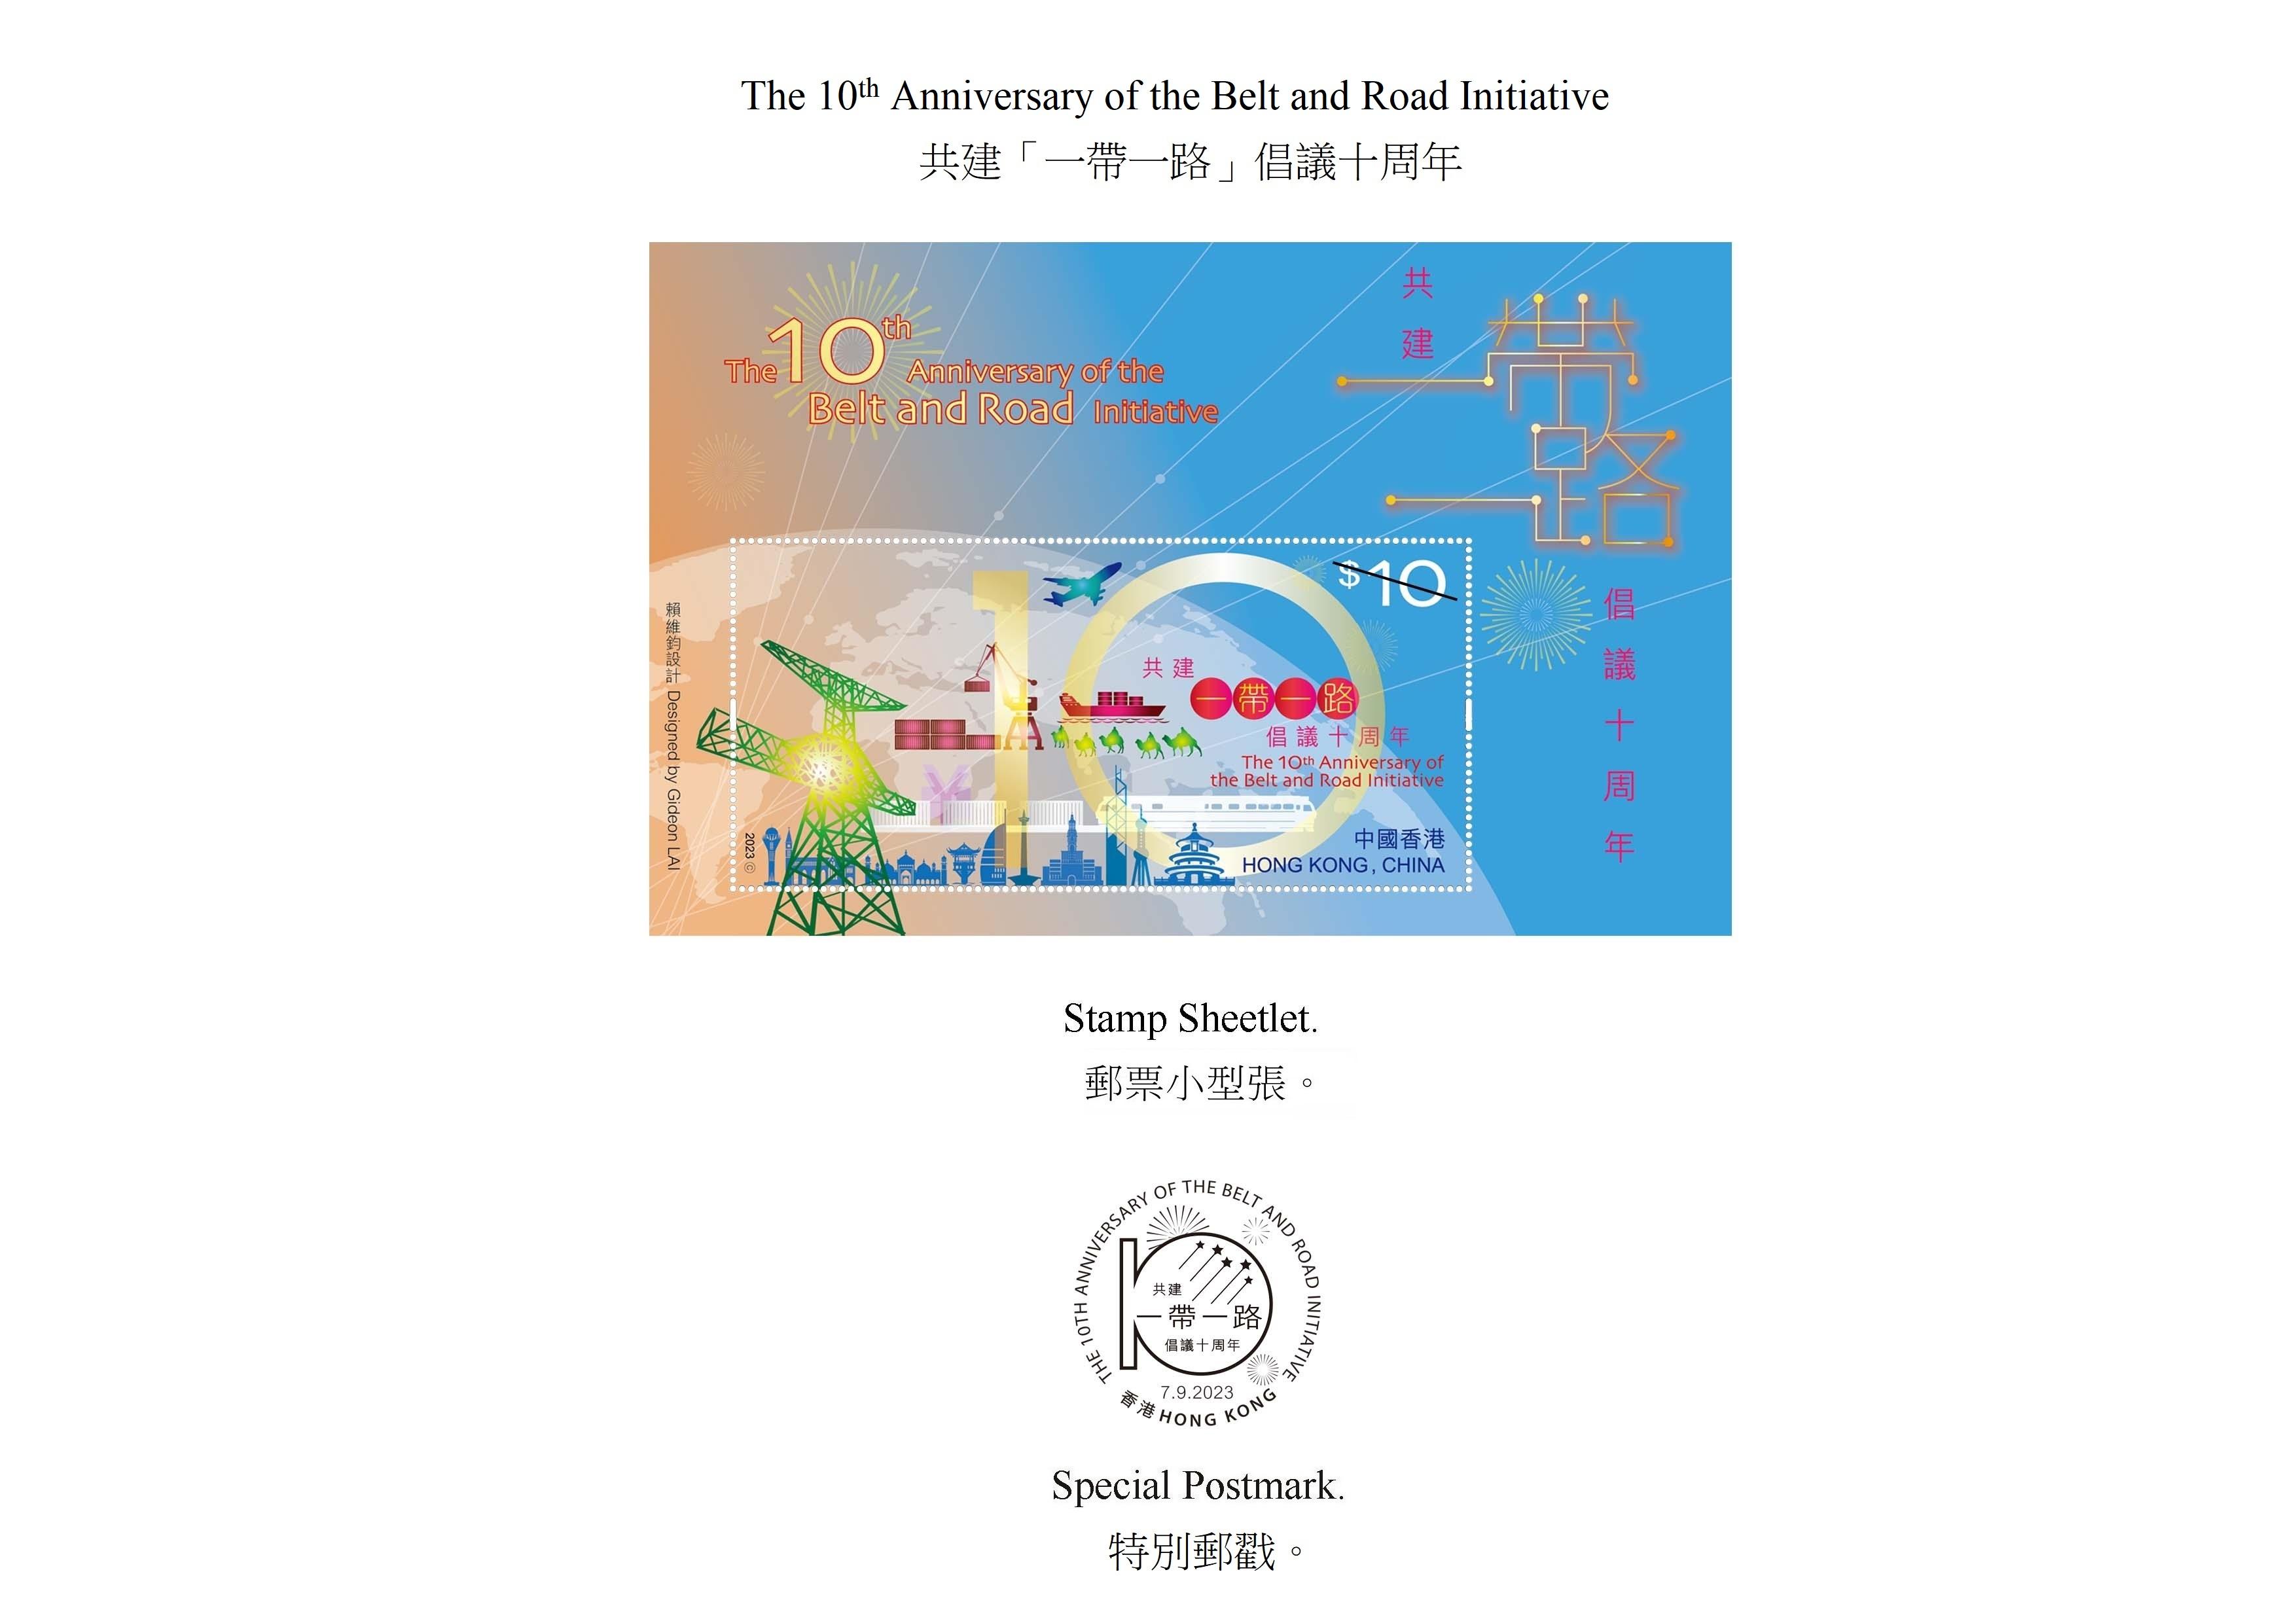 Hongkong Post will launch a commemorative stamp issue and associated philatelic products on the theme of "The 10th Anniversary of the Belt and Road Initiative" on September 7 (Thursday). Photos show the stamp sheetlet and the special postmark.
